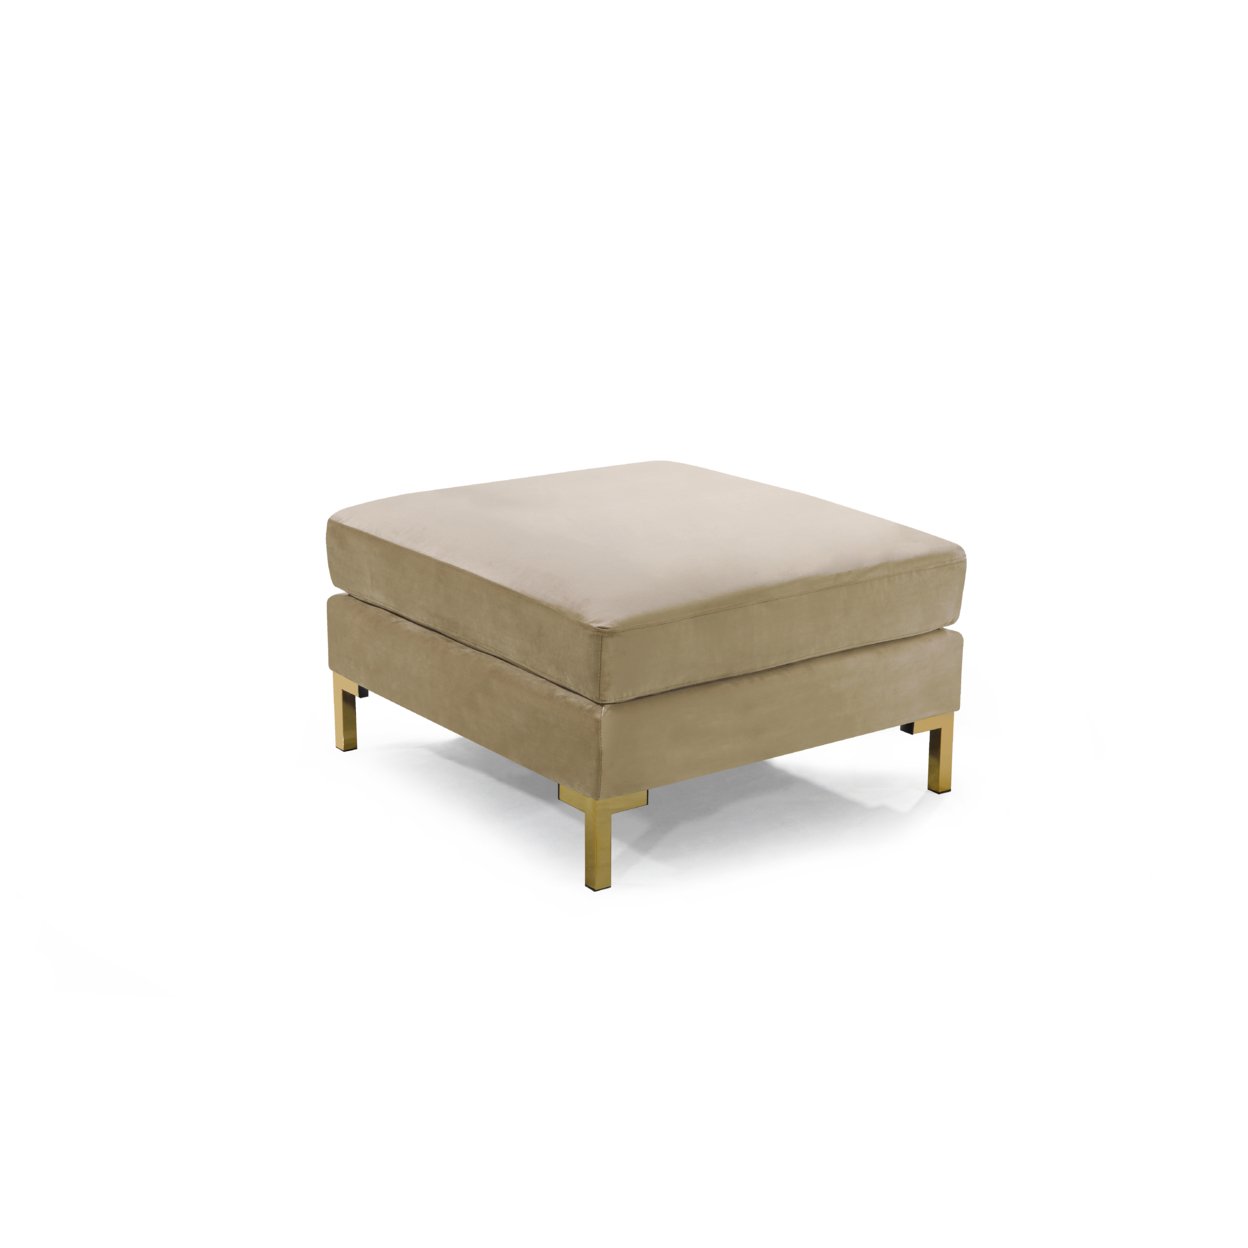 Greco Modular Chaise Ottoman Coffee Table Cushion Bench Solid Gold Tone Metal Y-Leg - Teal